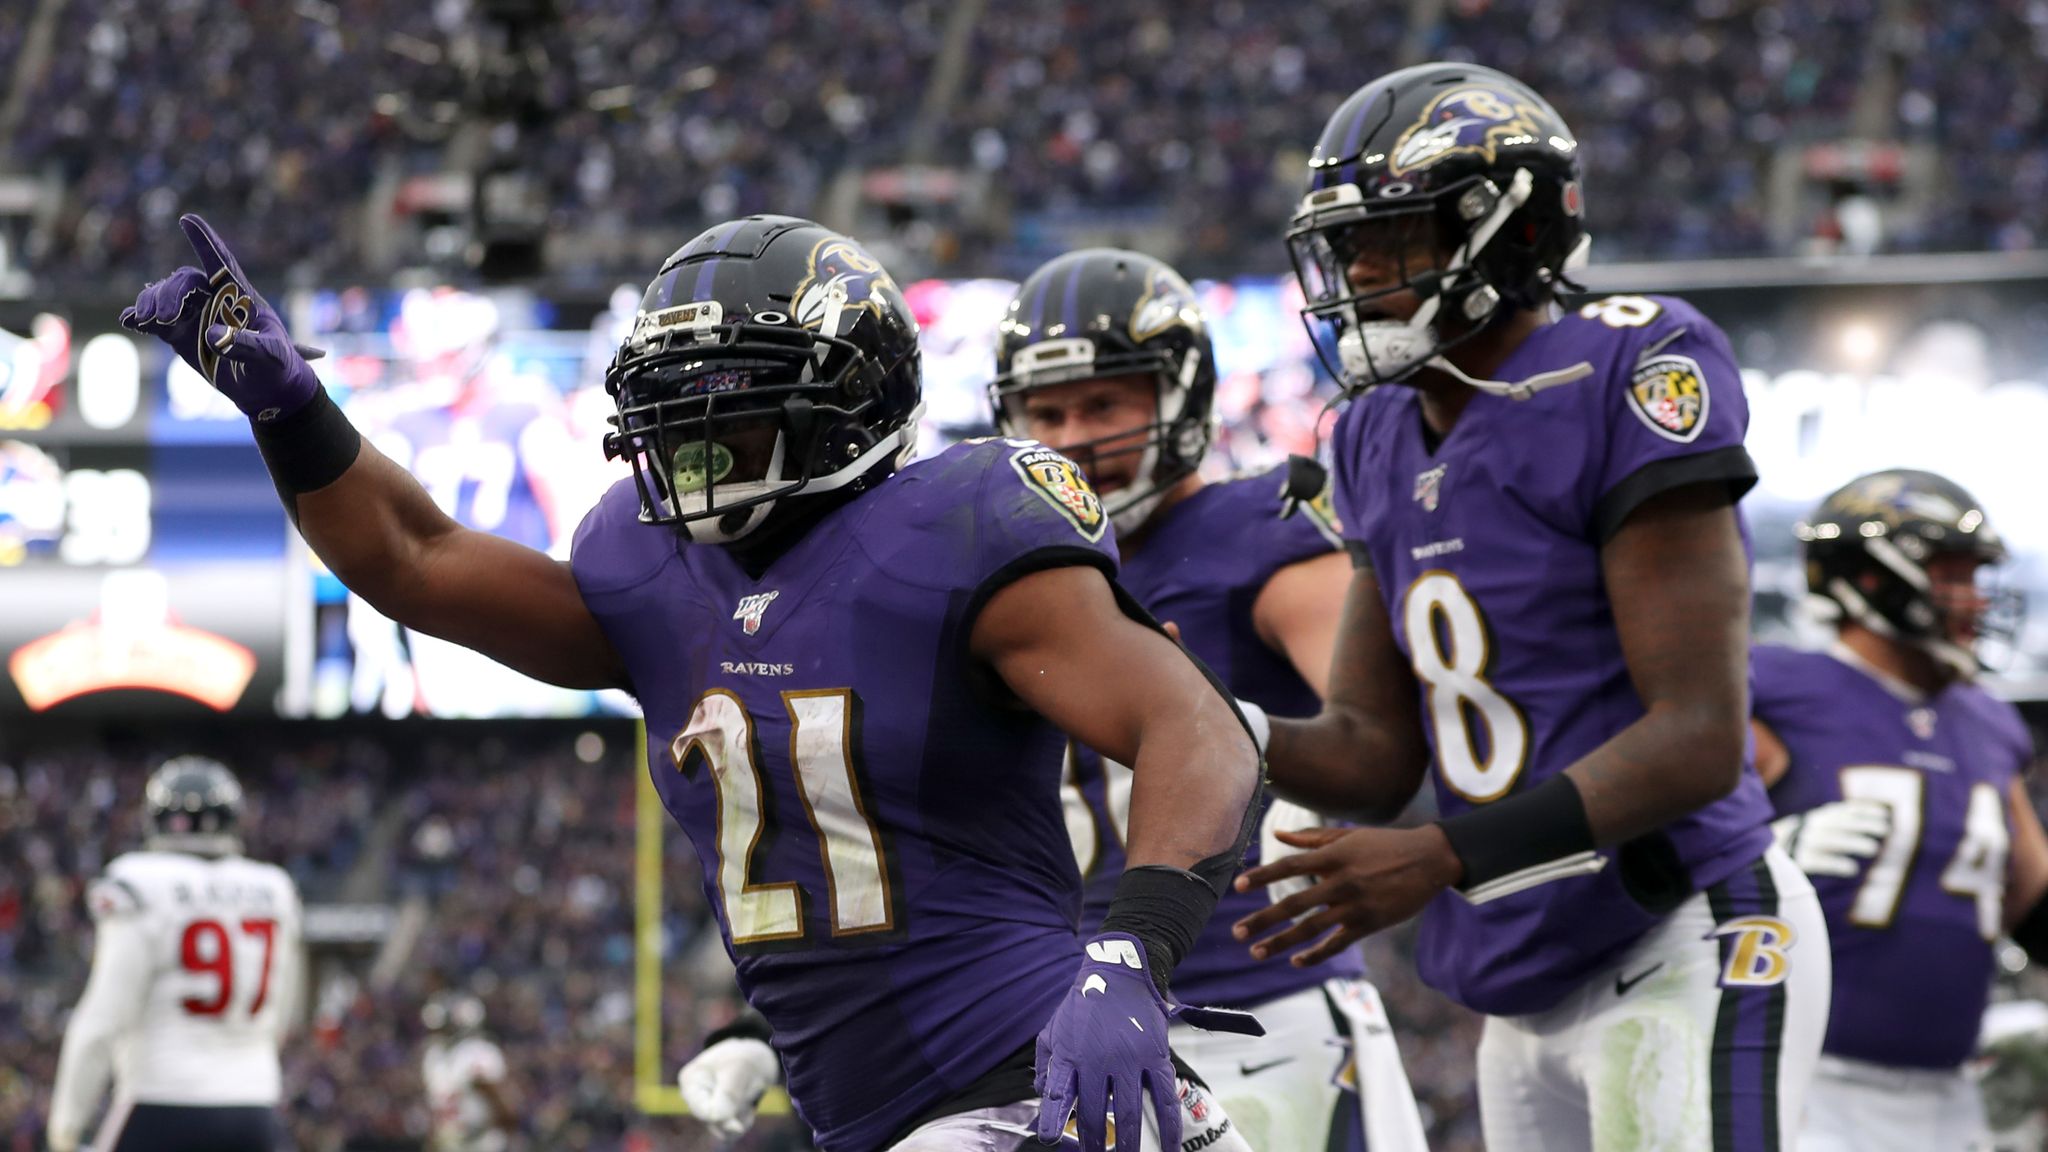 Local 21 CBS News, WHP Harrisburg - SUNDAY FOOTBALL SCHEDULE The Baltimore  Ravens travel to Houston to take on the Texans at 1:00 p.m. today followed  by the Colts vs. Cowboys game